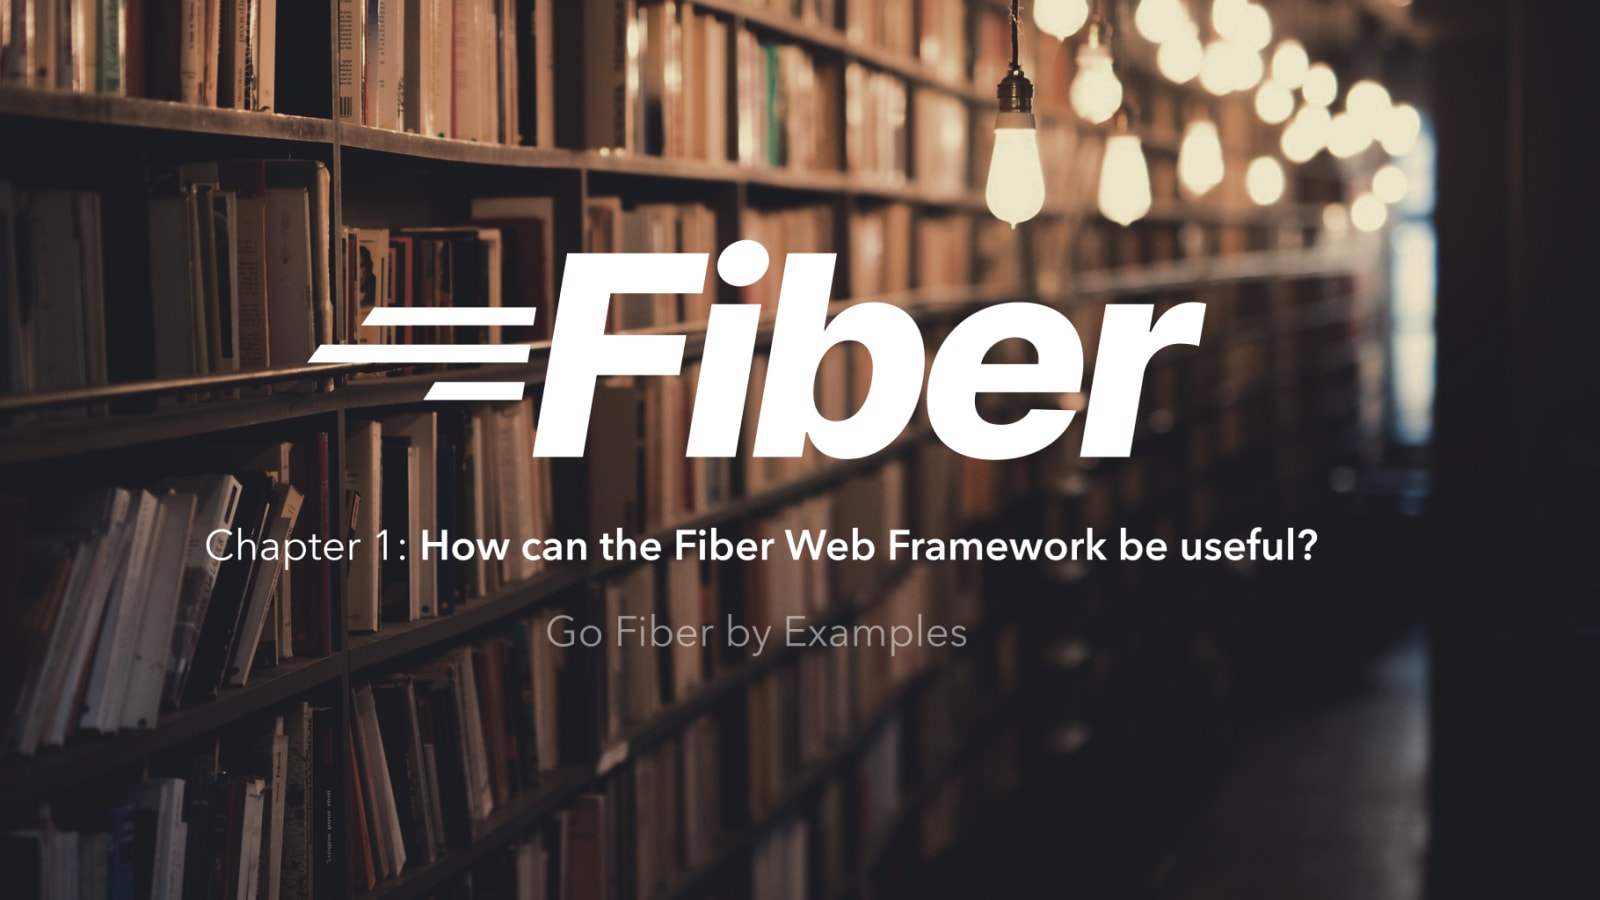  Go Fiber by Examples: How can the Fiber Web Framework be useful ...